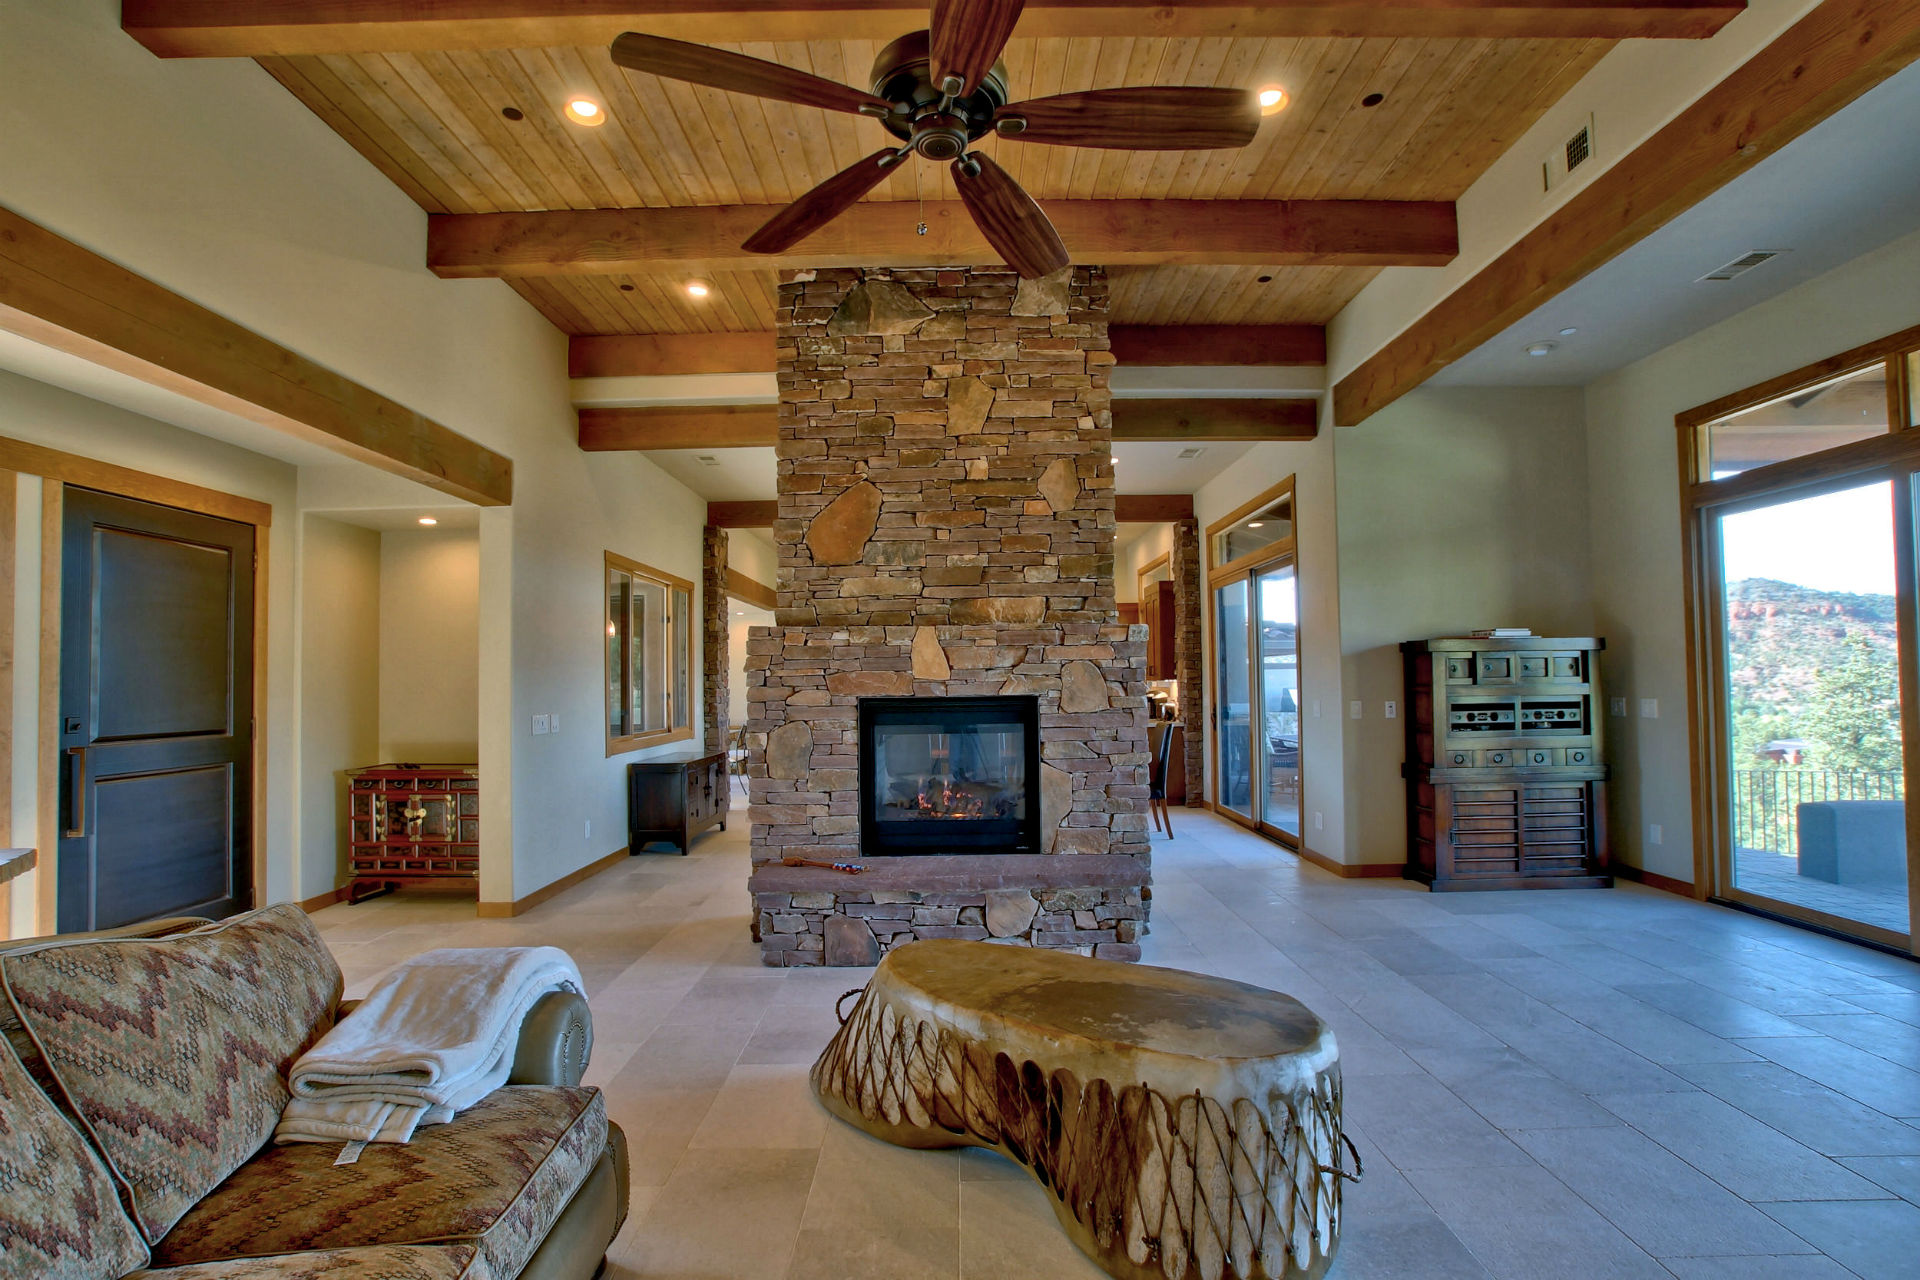 A living room with a fireplace and wooden beams.